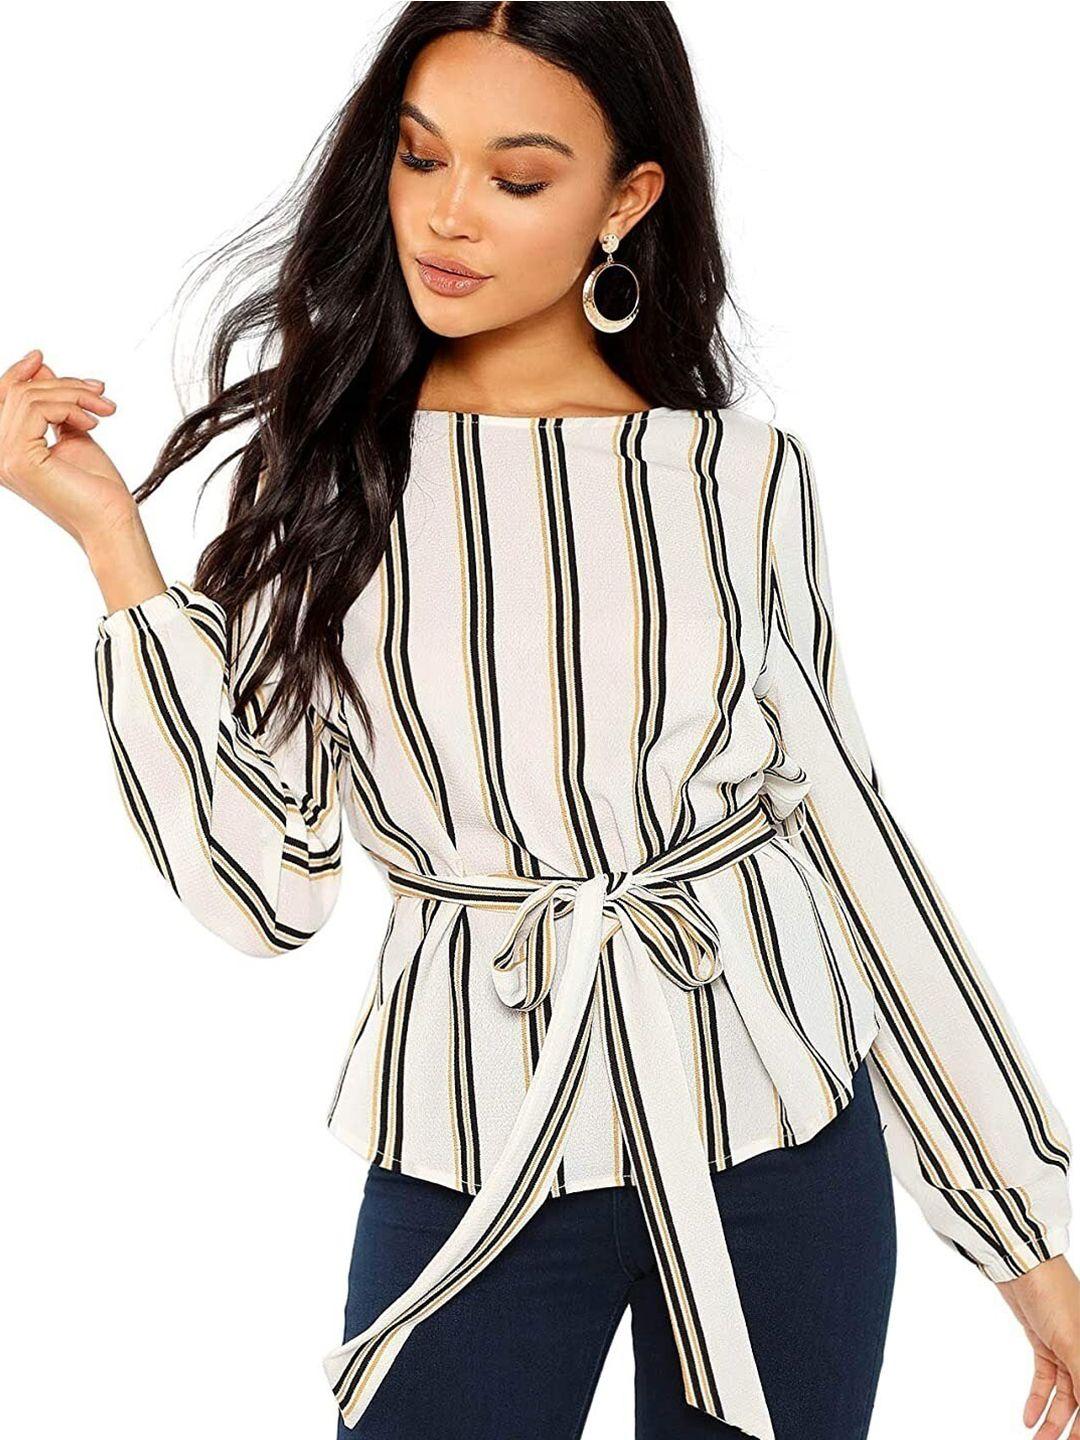 slyck vertical striped puff sleeves top